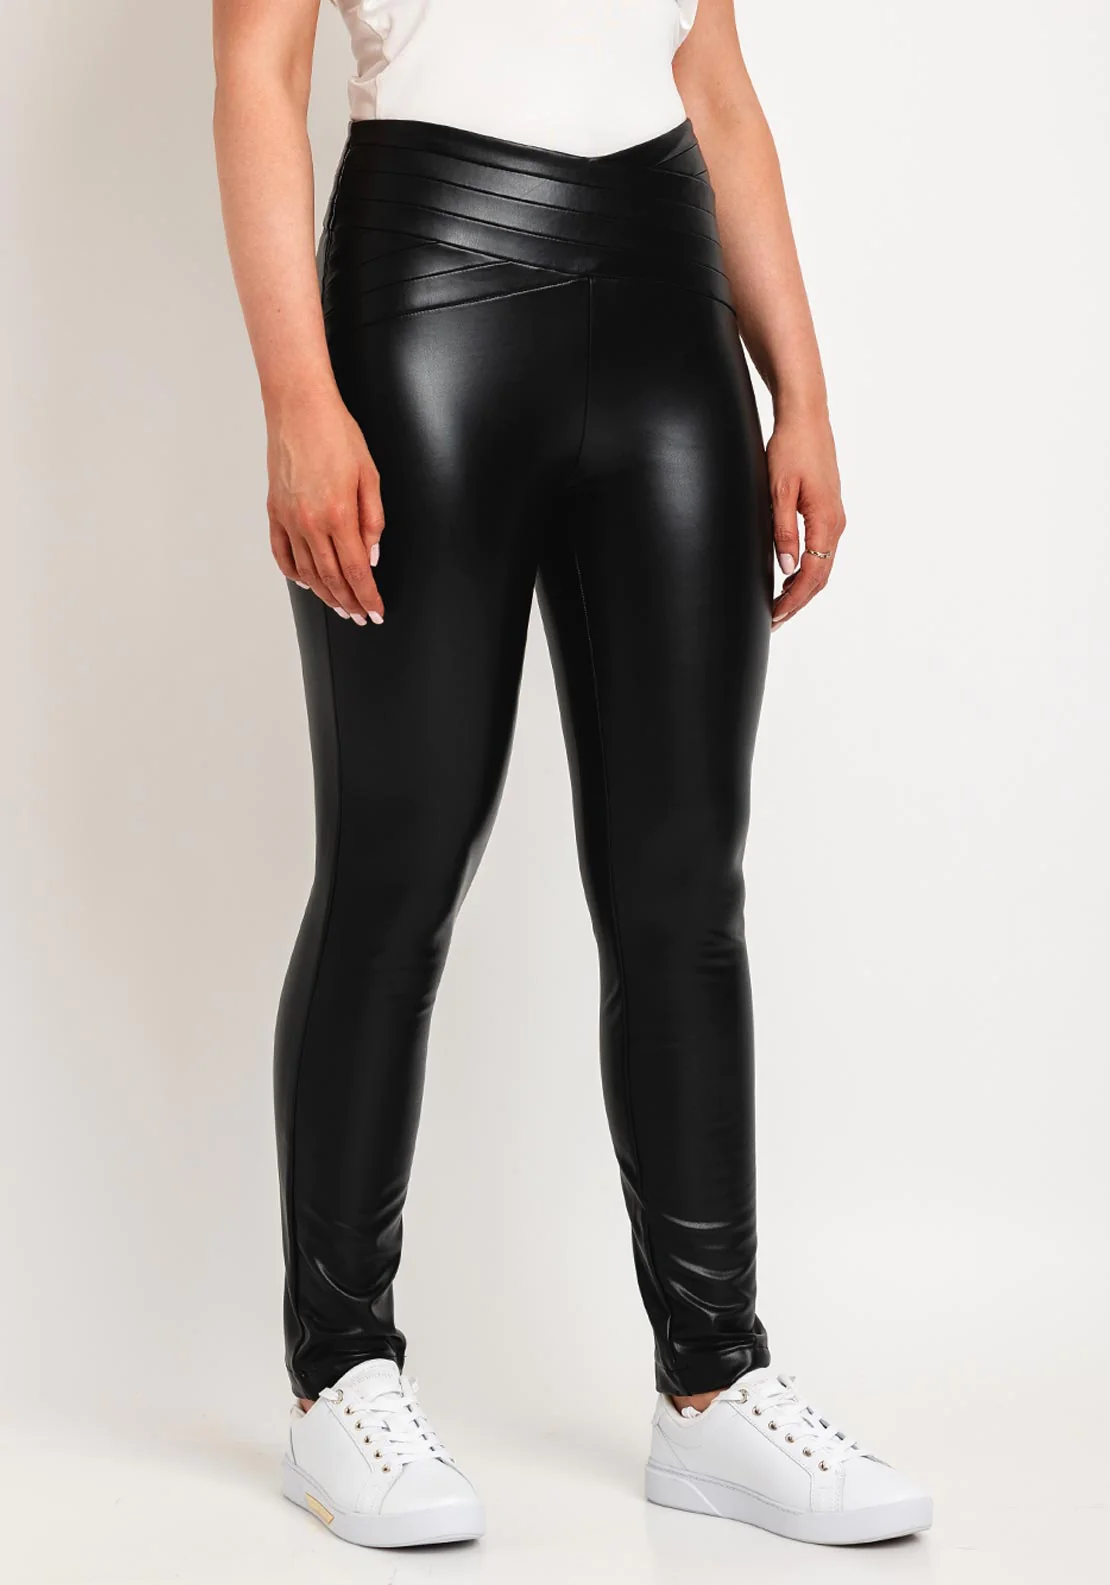 Guess Dana Leather Skinny Leggings - Sixty Three Boutique